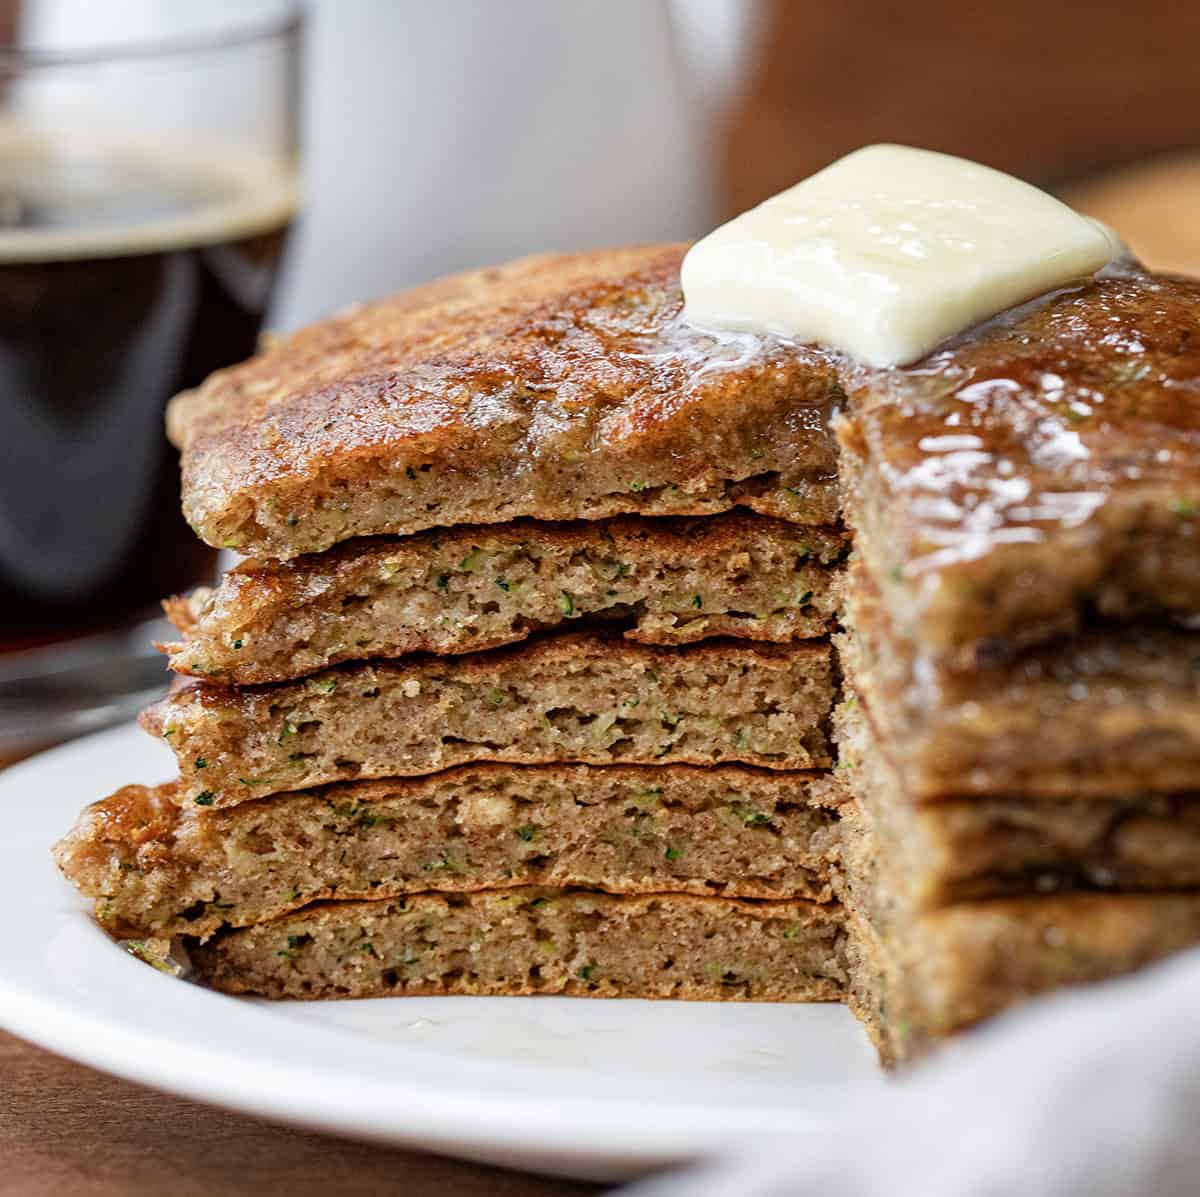 Stack of Zucchini Pancakes that have been cut into showing inside texture.